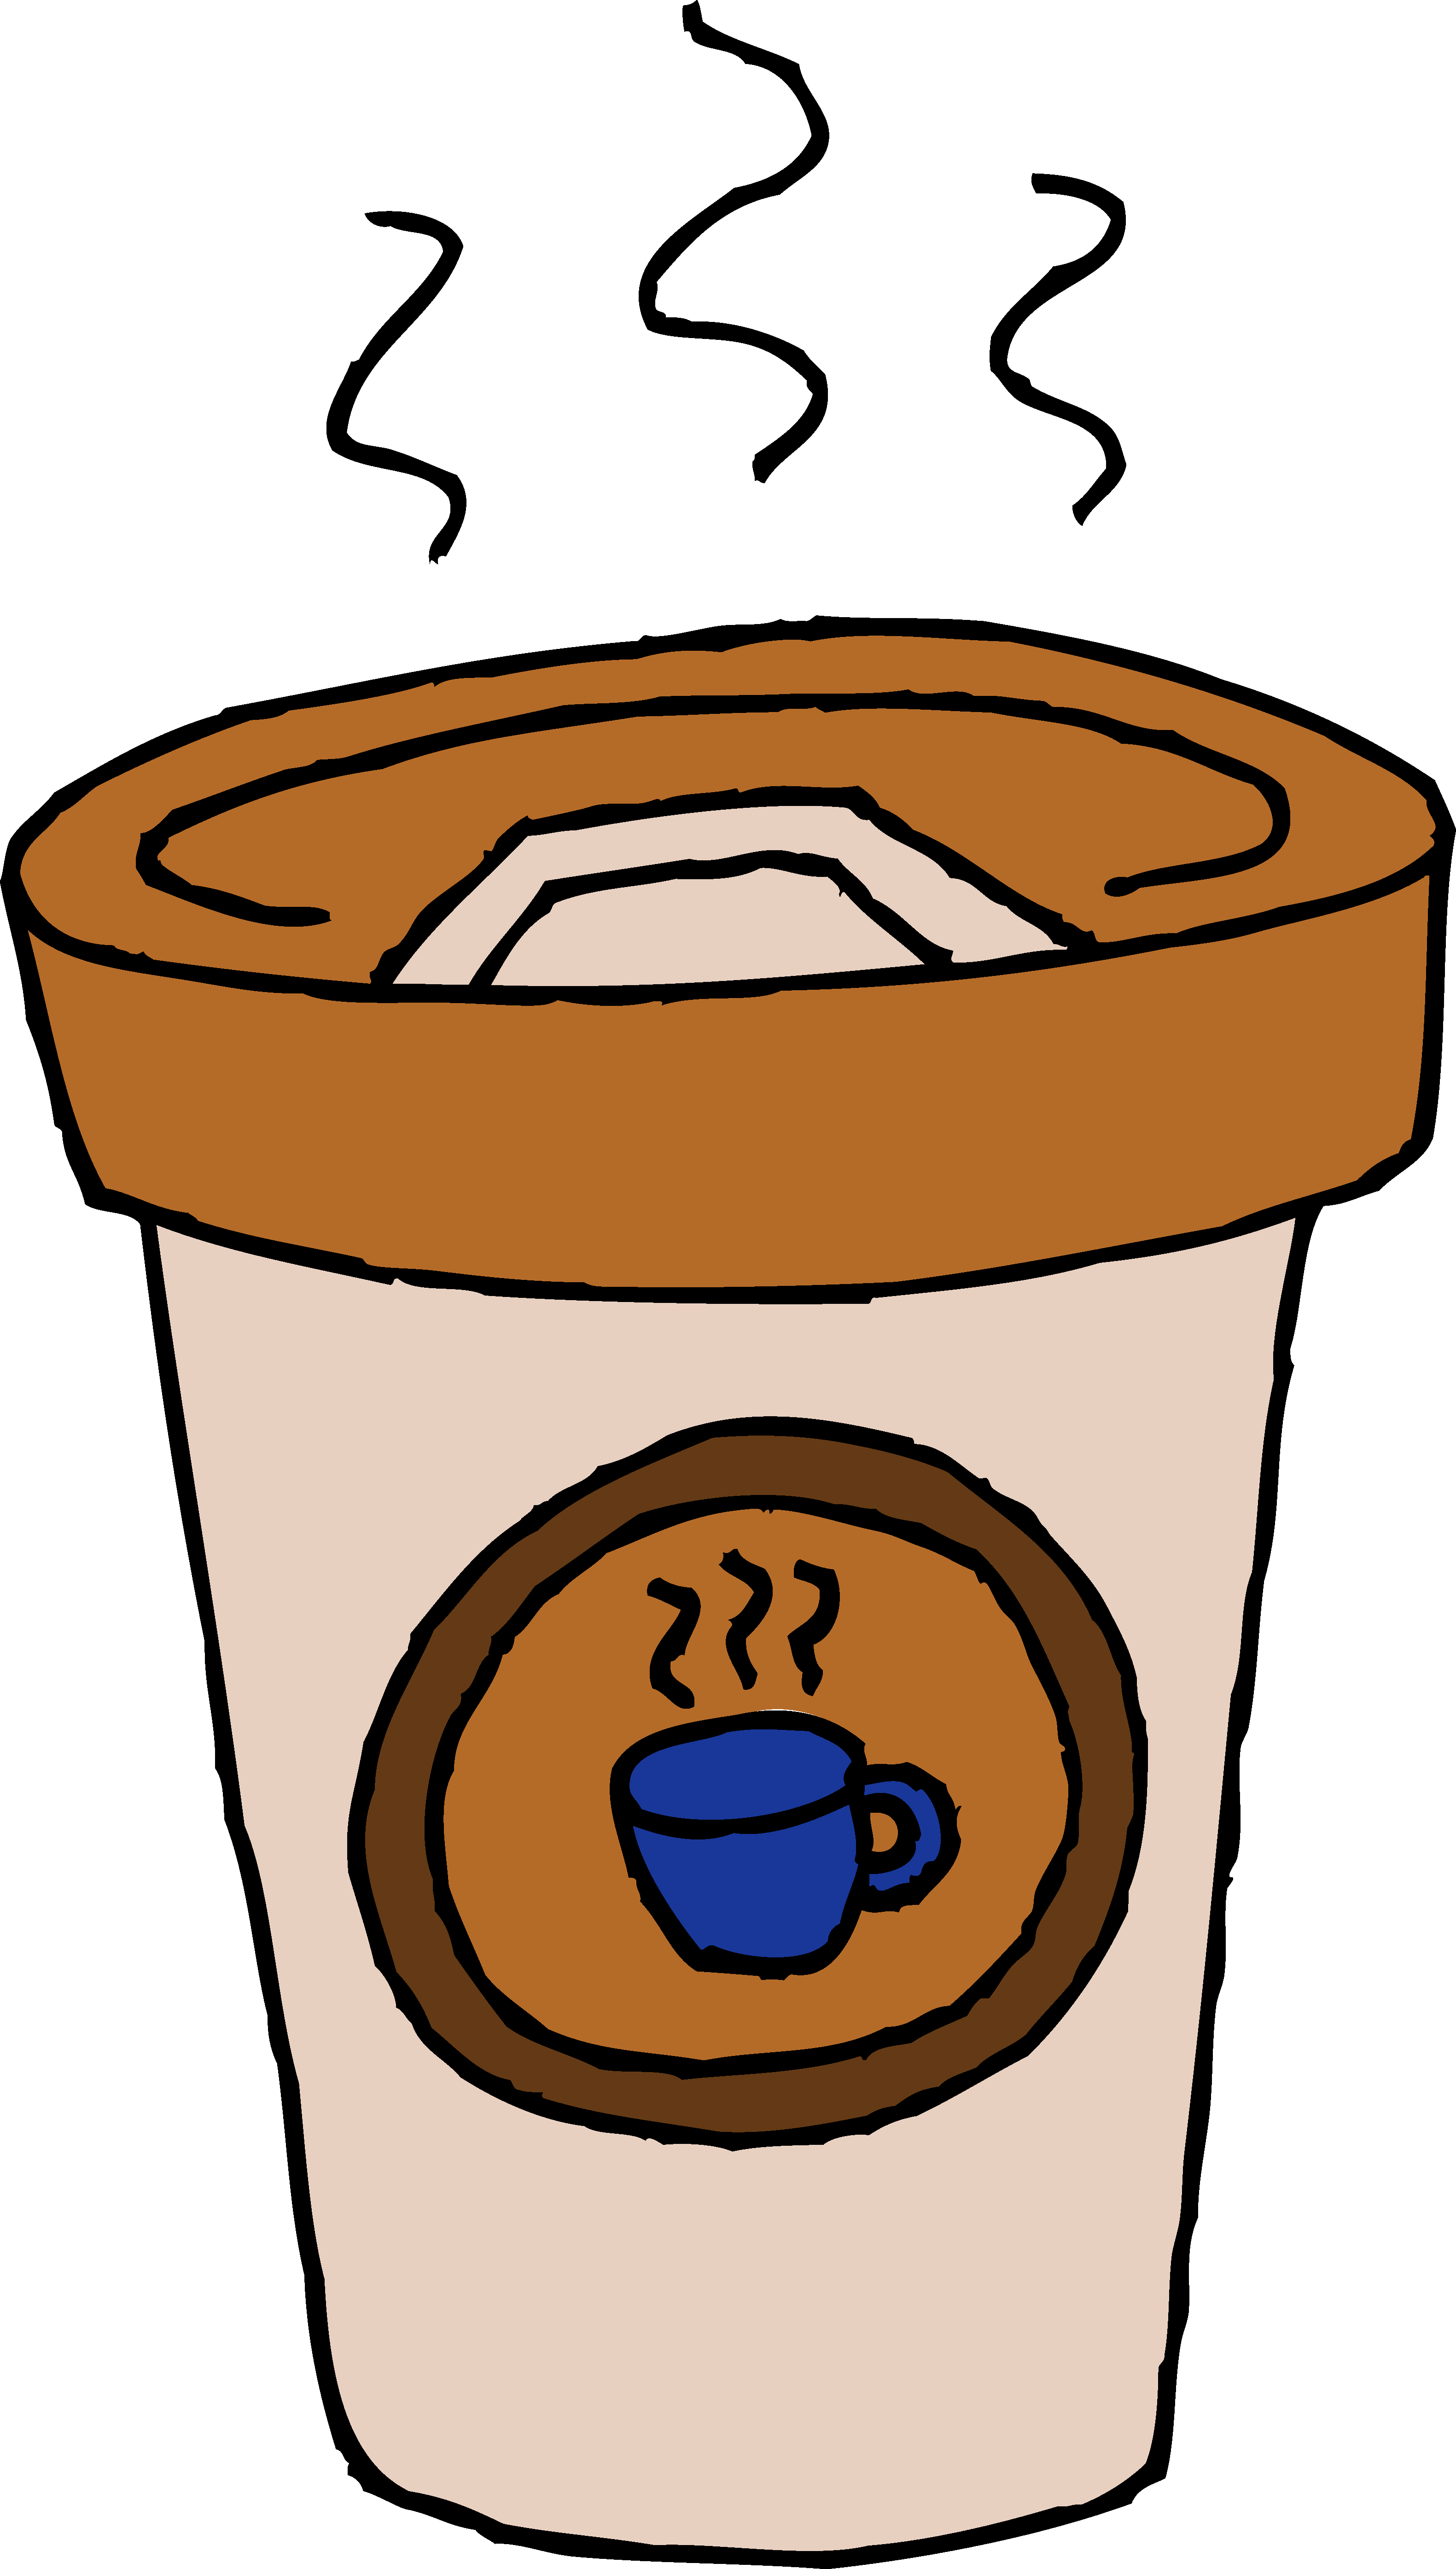 Coffee To Go Clipart - ClipArt Best